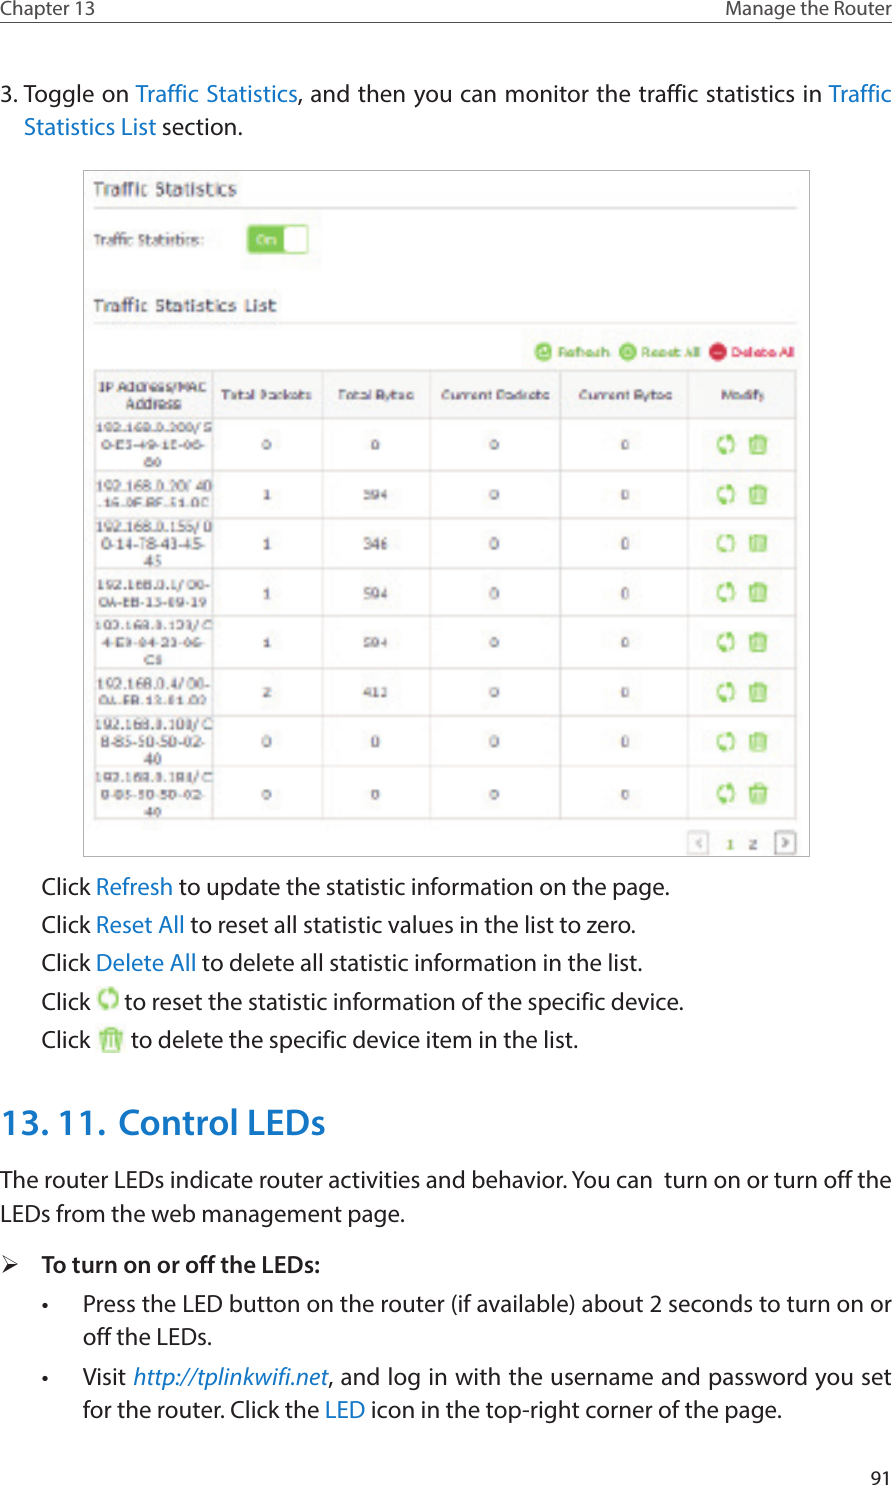 91Chapter 13 Manage the Router 3. Toggle on Traffic Statistics, and then you can monitor the traffic statistics in Traffic Statistics List section. Click Refresh to update the statistic information on the page.Click Reset All to reset all statistic values in the list to zero.Click Delete All to delete all statistic information in the list.Click   to reset the statistic information of the specific device.Click   to delete the specific device item in the list.13. 11.  Control LEDsThe router LEDs indicate router activities and behavior. You can  turn on or turn off the LEDs from the web management page. ¾To turn on or off the LEDs:•  Press the LED button on the router (if available) about 2 seconds to turn on or off the LEDs.•  Visit http://tplinkwifi.net, and log in with the username and password you set for the router. Click the LED icon in the top-right corner of the page.